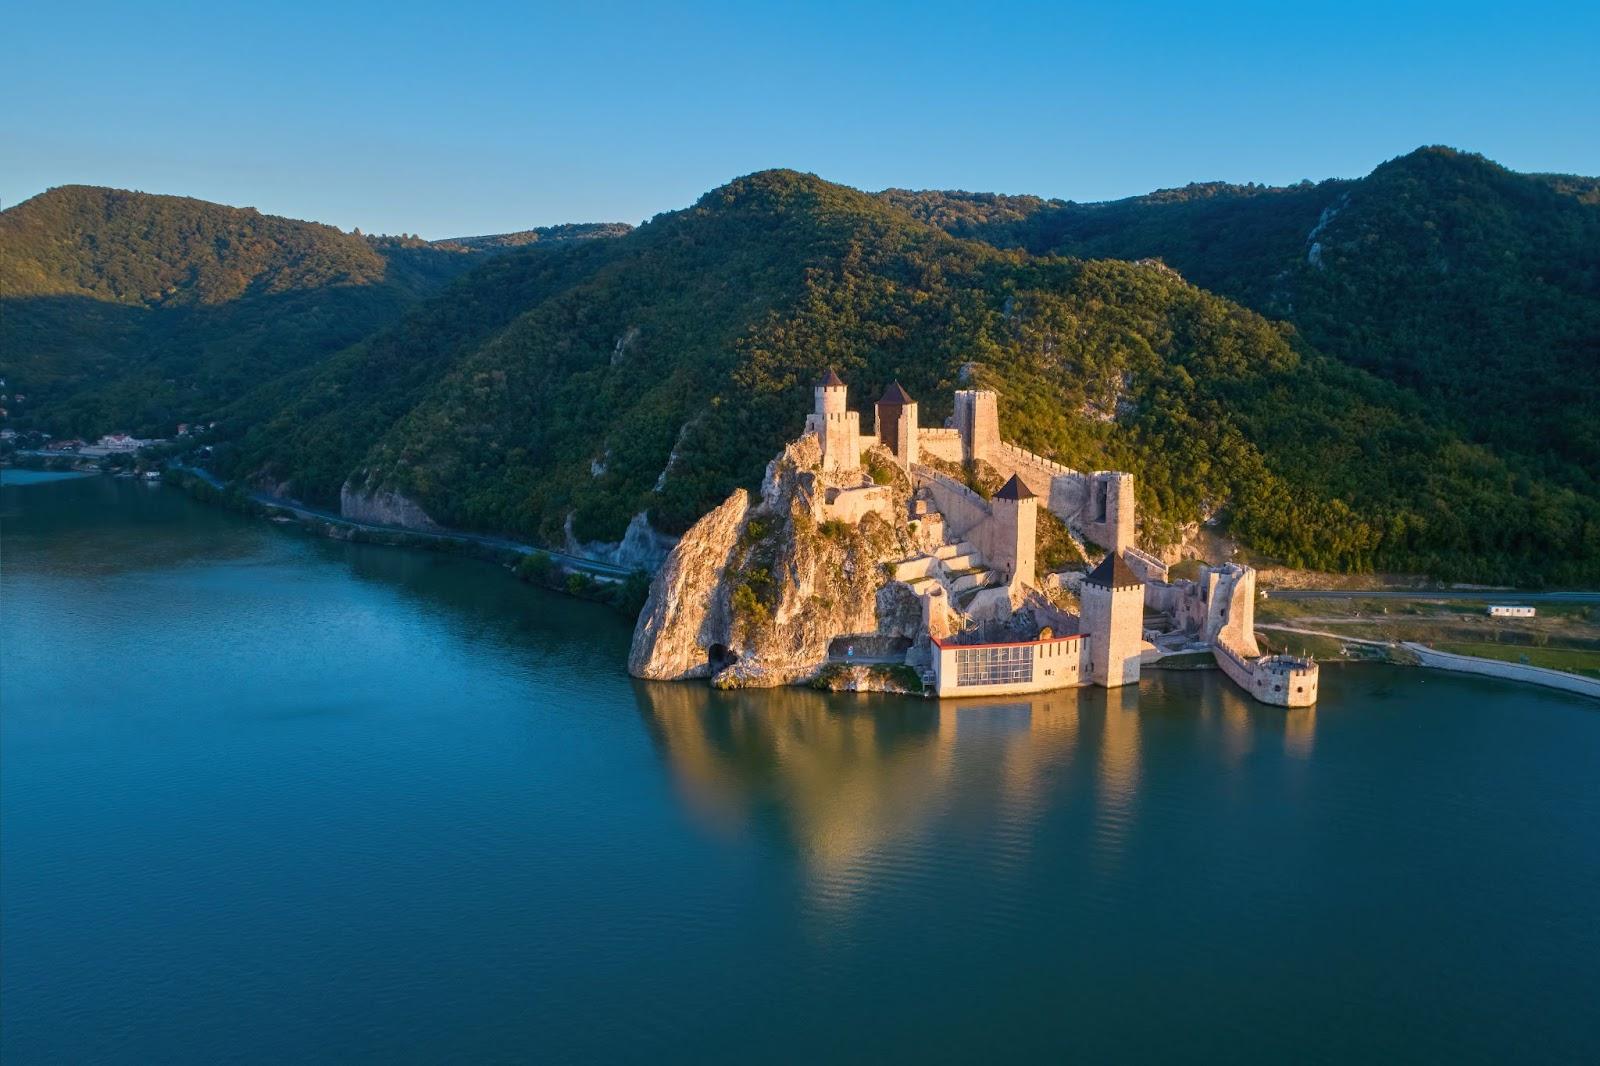 The medieval fortress of Golubac, mirroring in the waters of the Danube. 